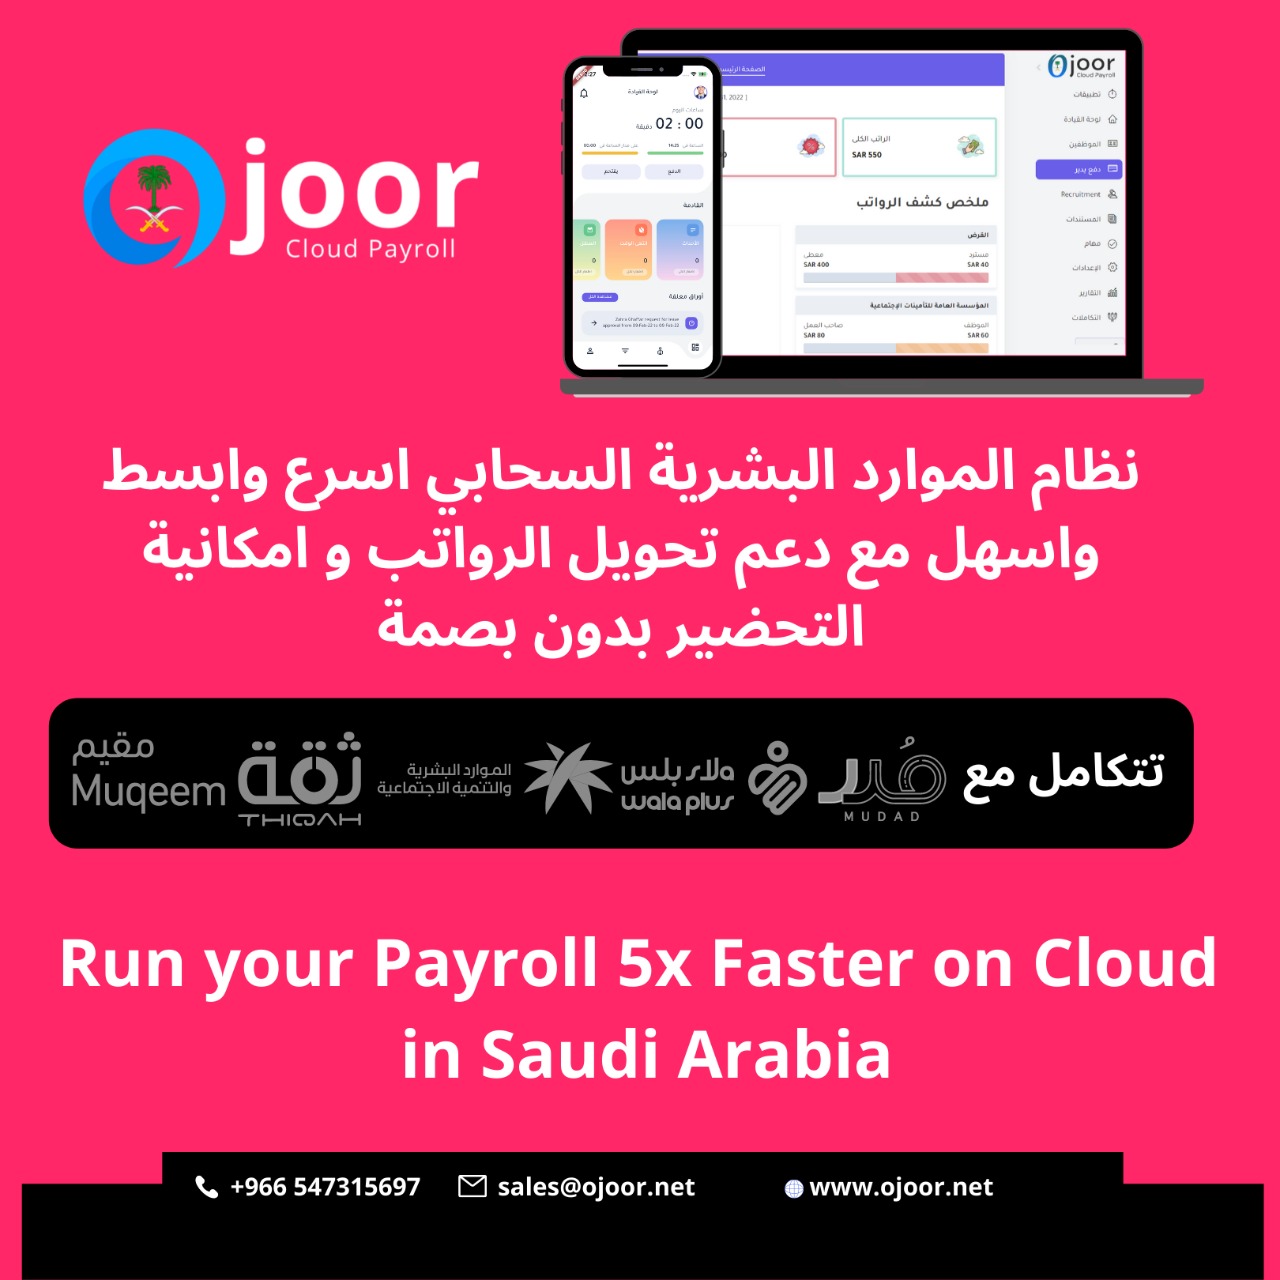 Which are the 10 main Advantages of Cloud HR Software in Saudi?